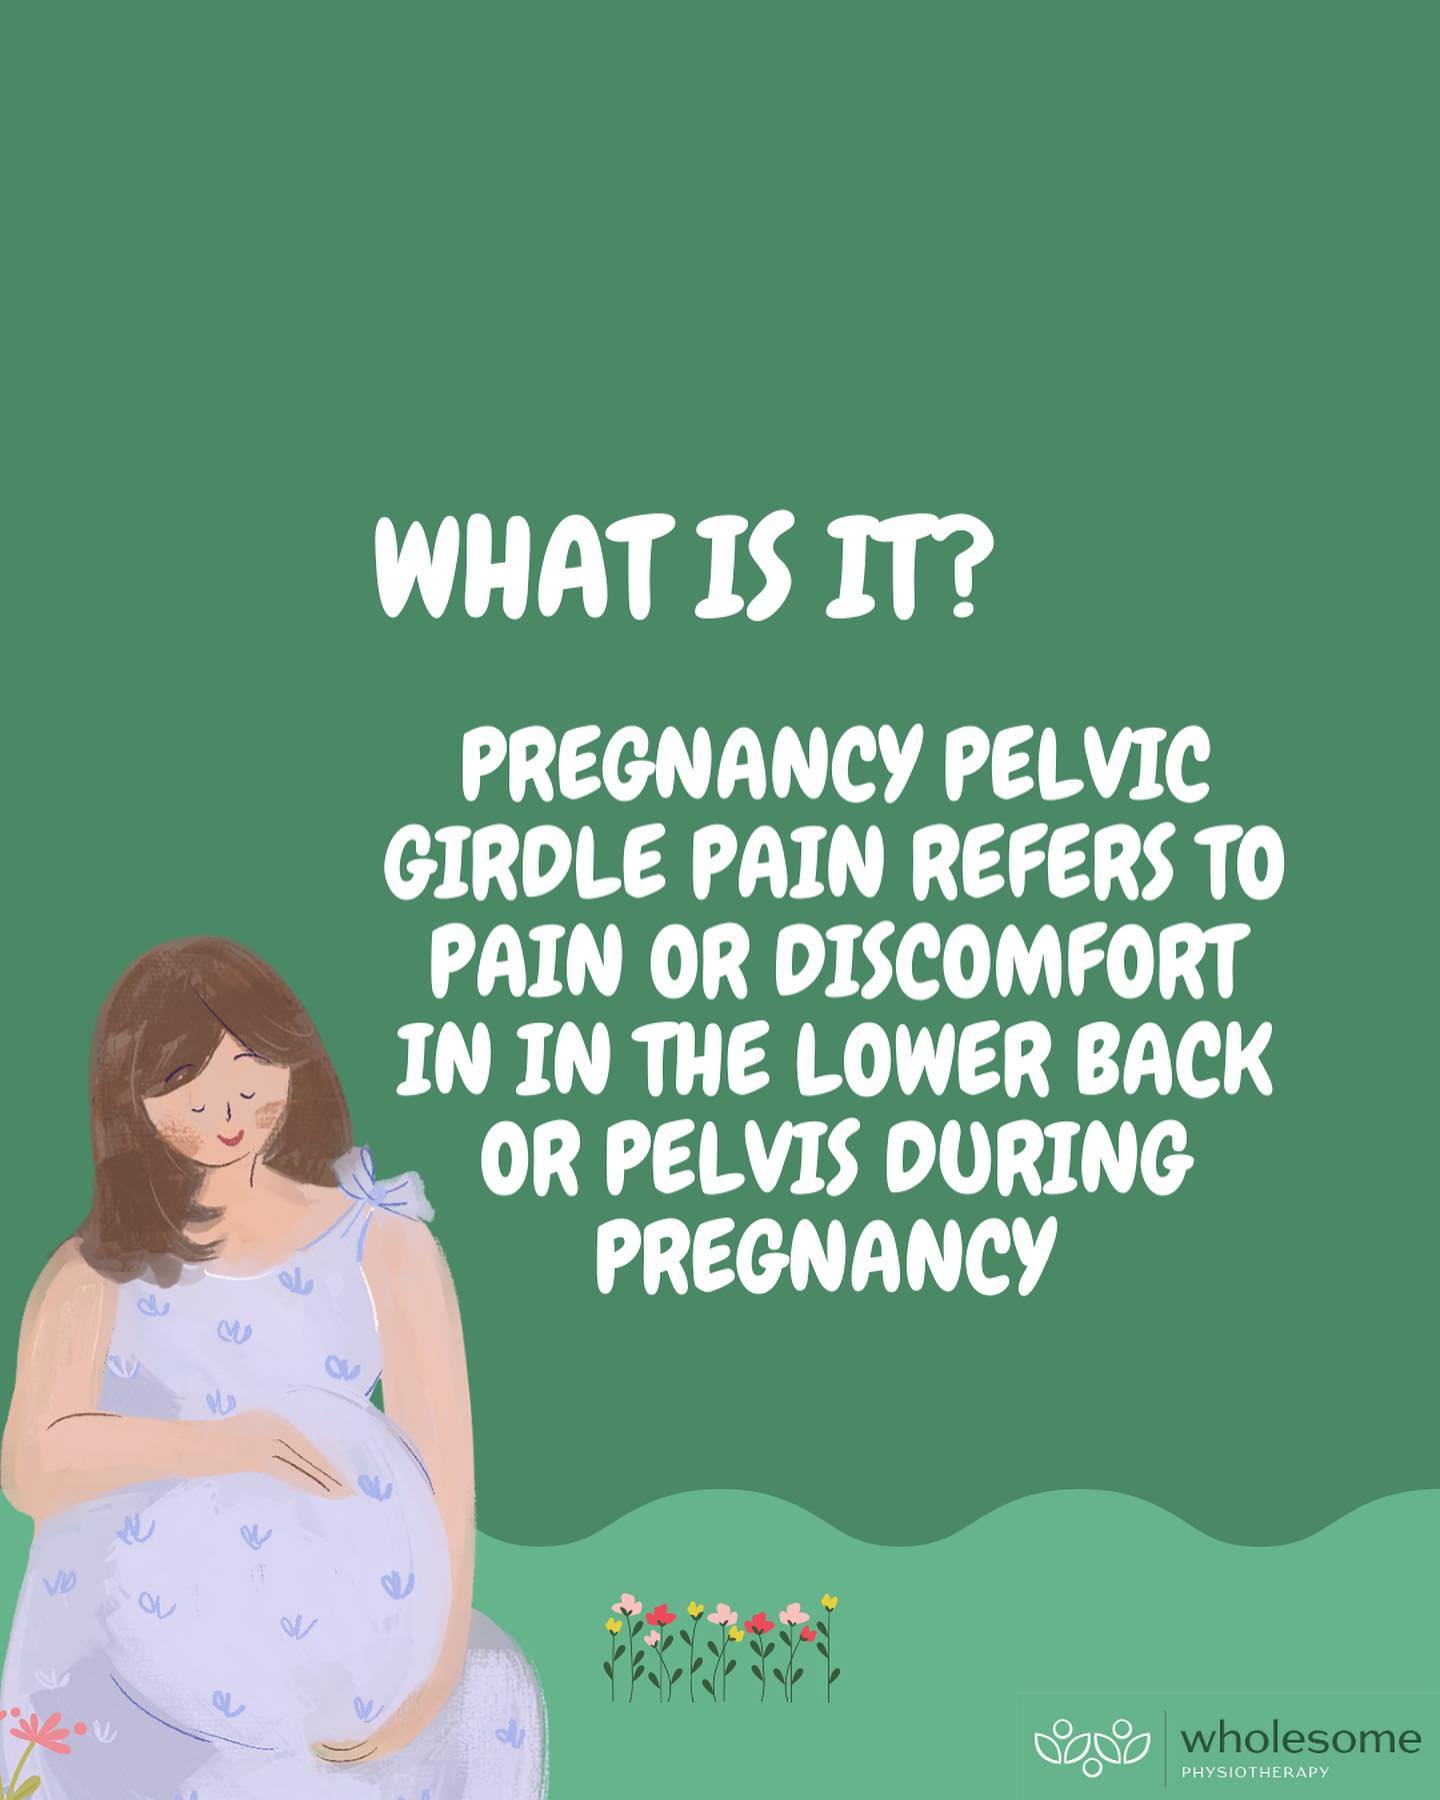 Pelvic girdle pain in pregnancy: causes, symptoms and treatment